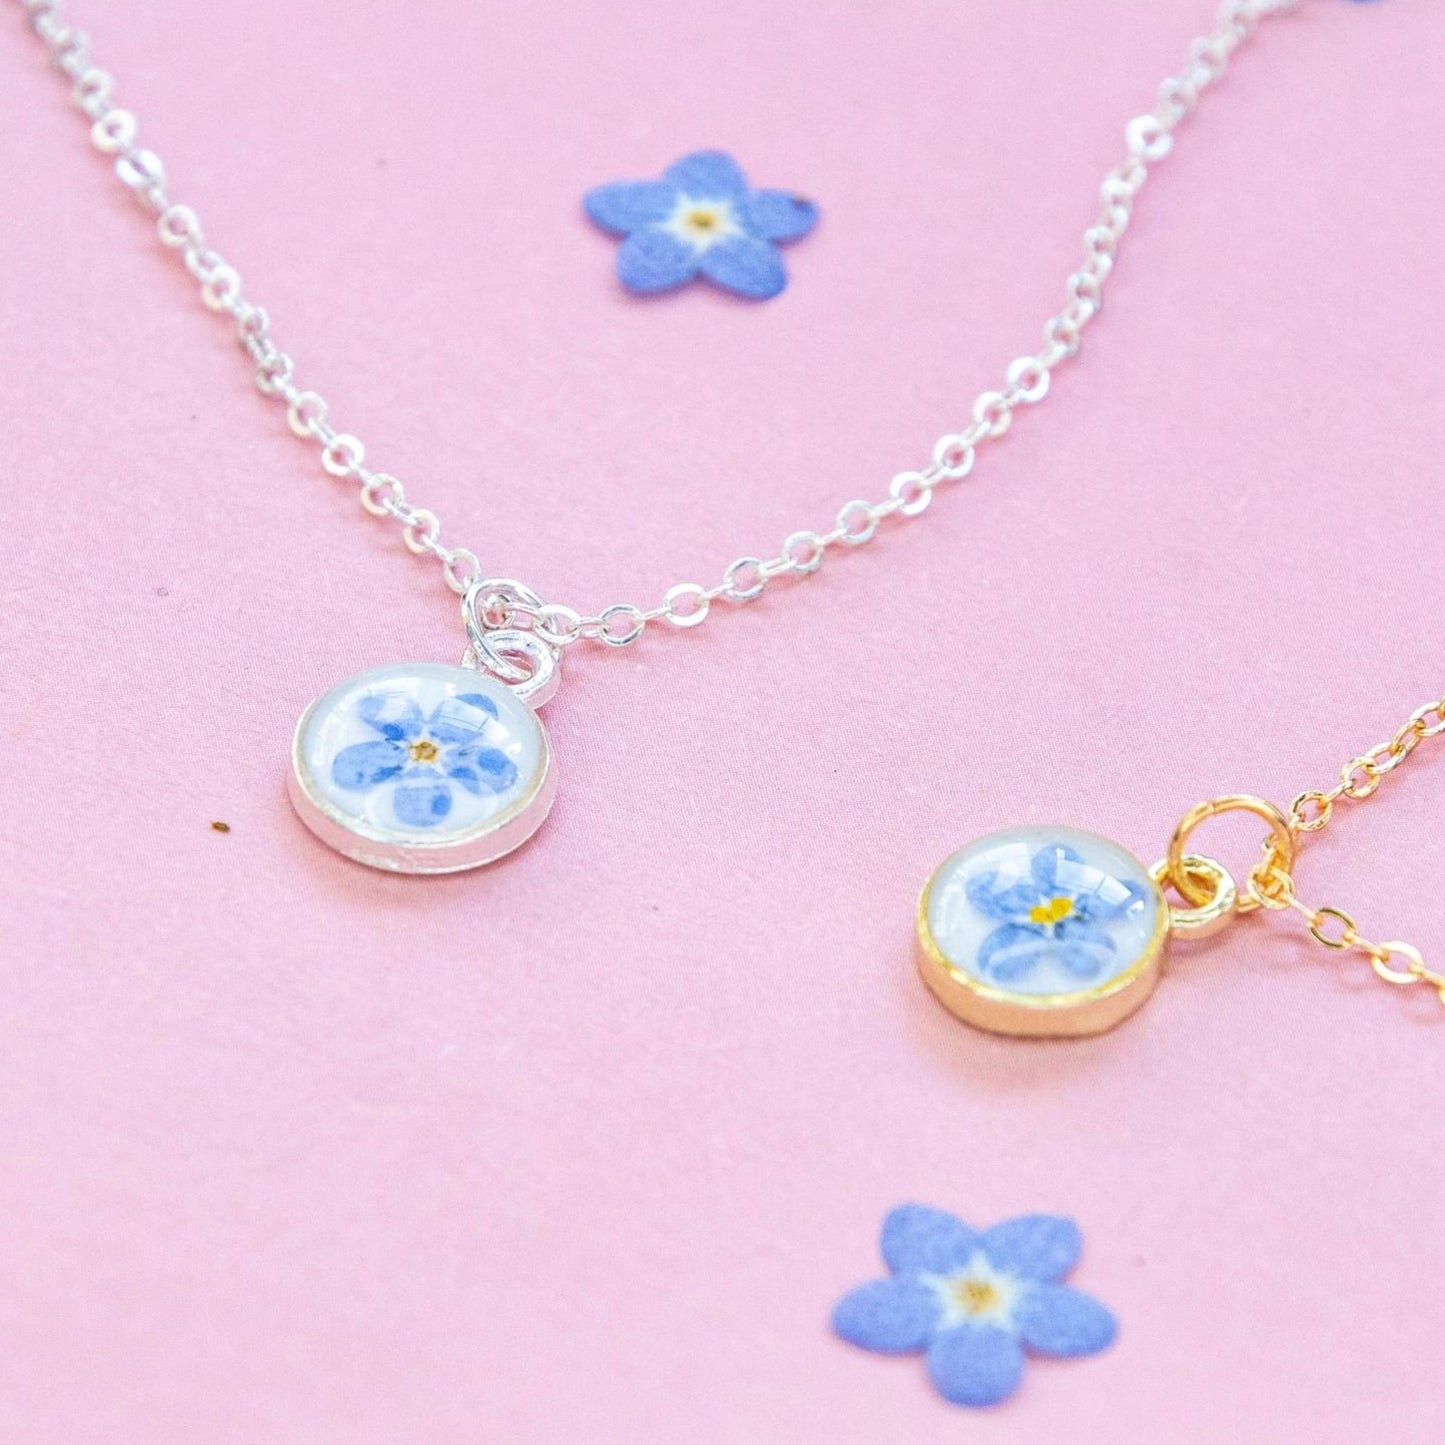 EVA Necklace With Dried Forget-Me-Not In Clear UV Resin - Silver Plated - The Little Jewellery Company